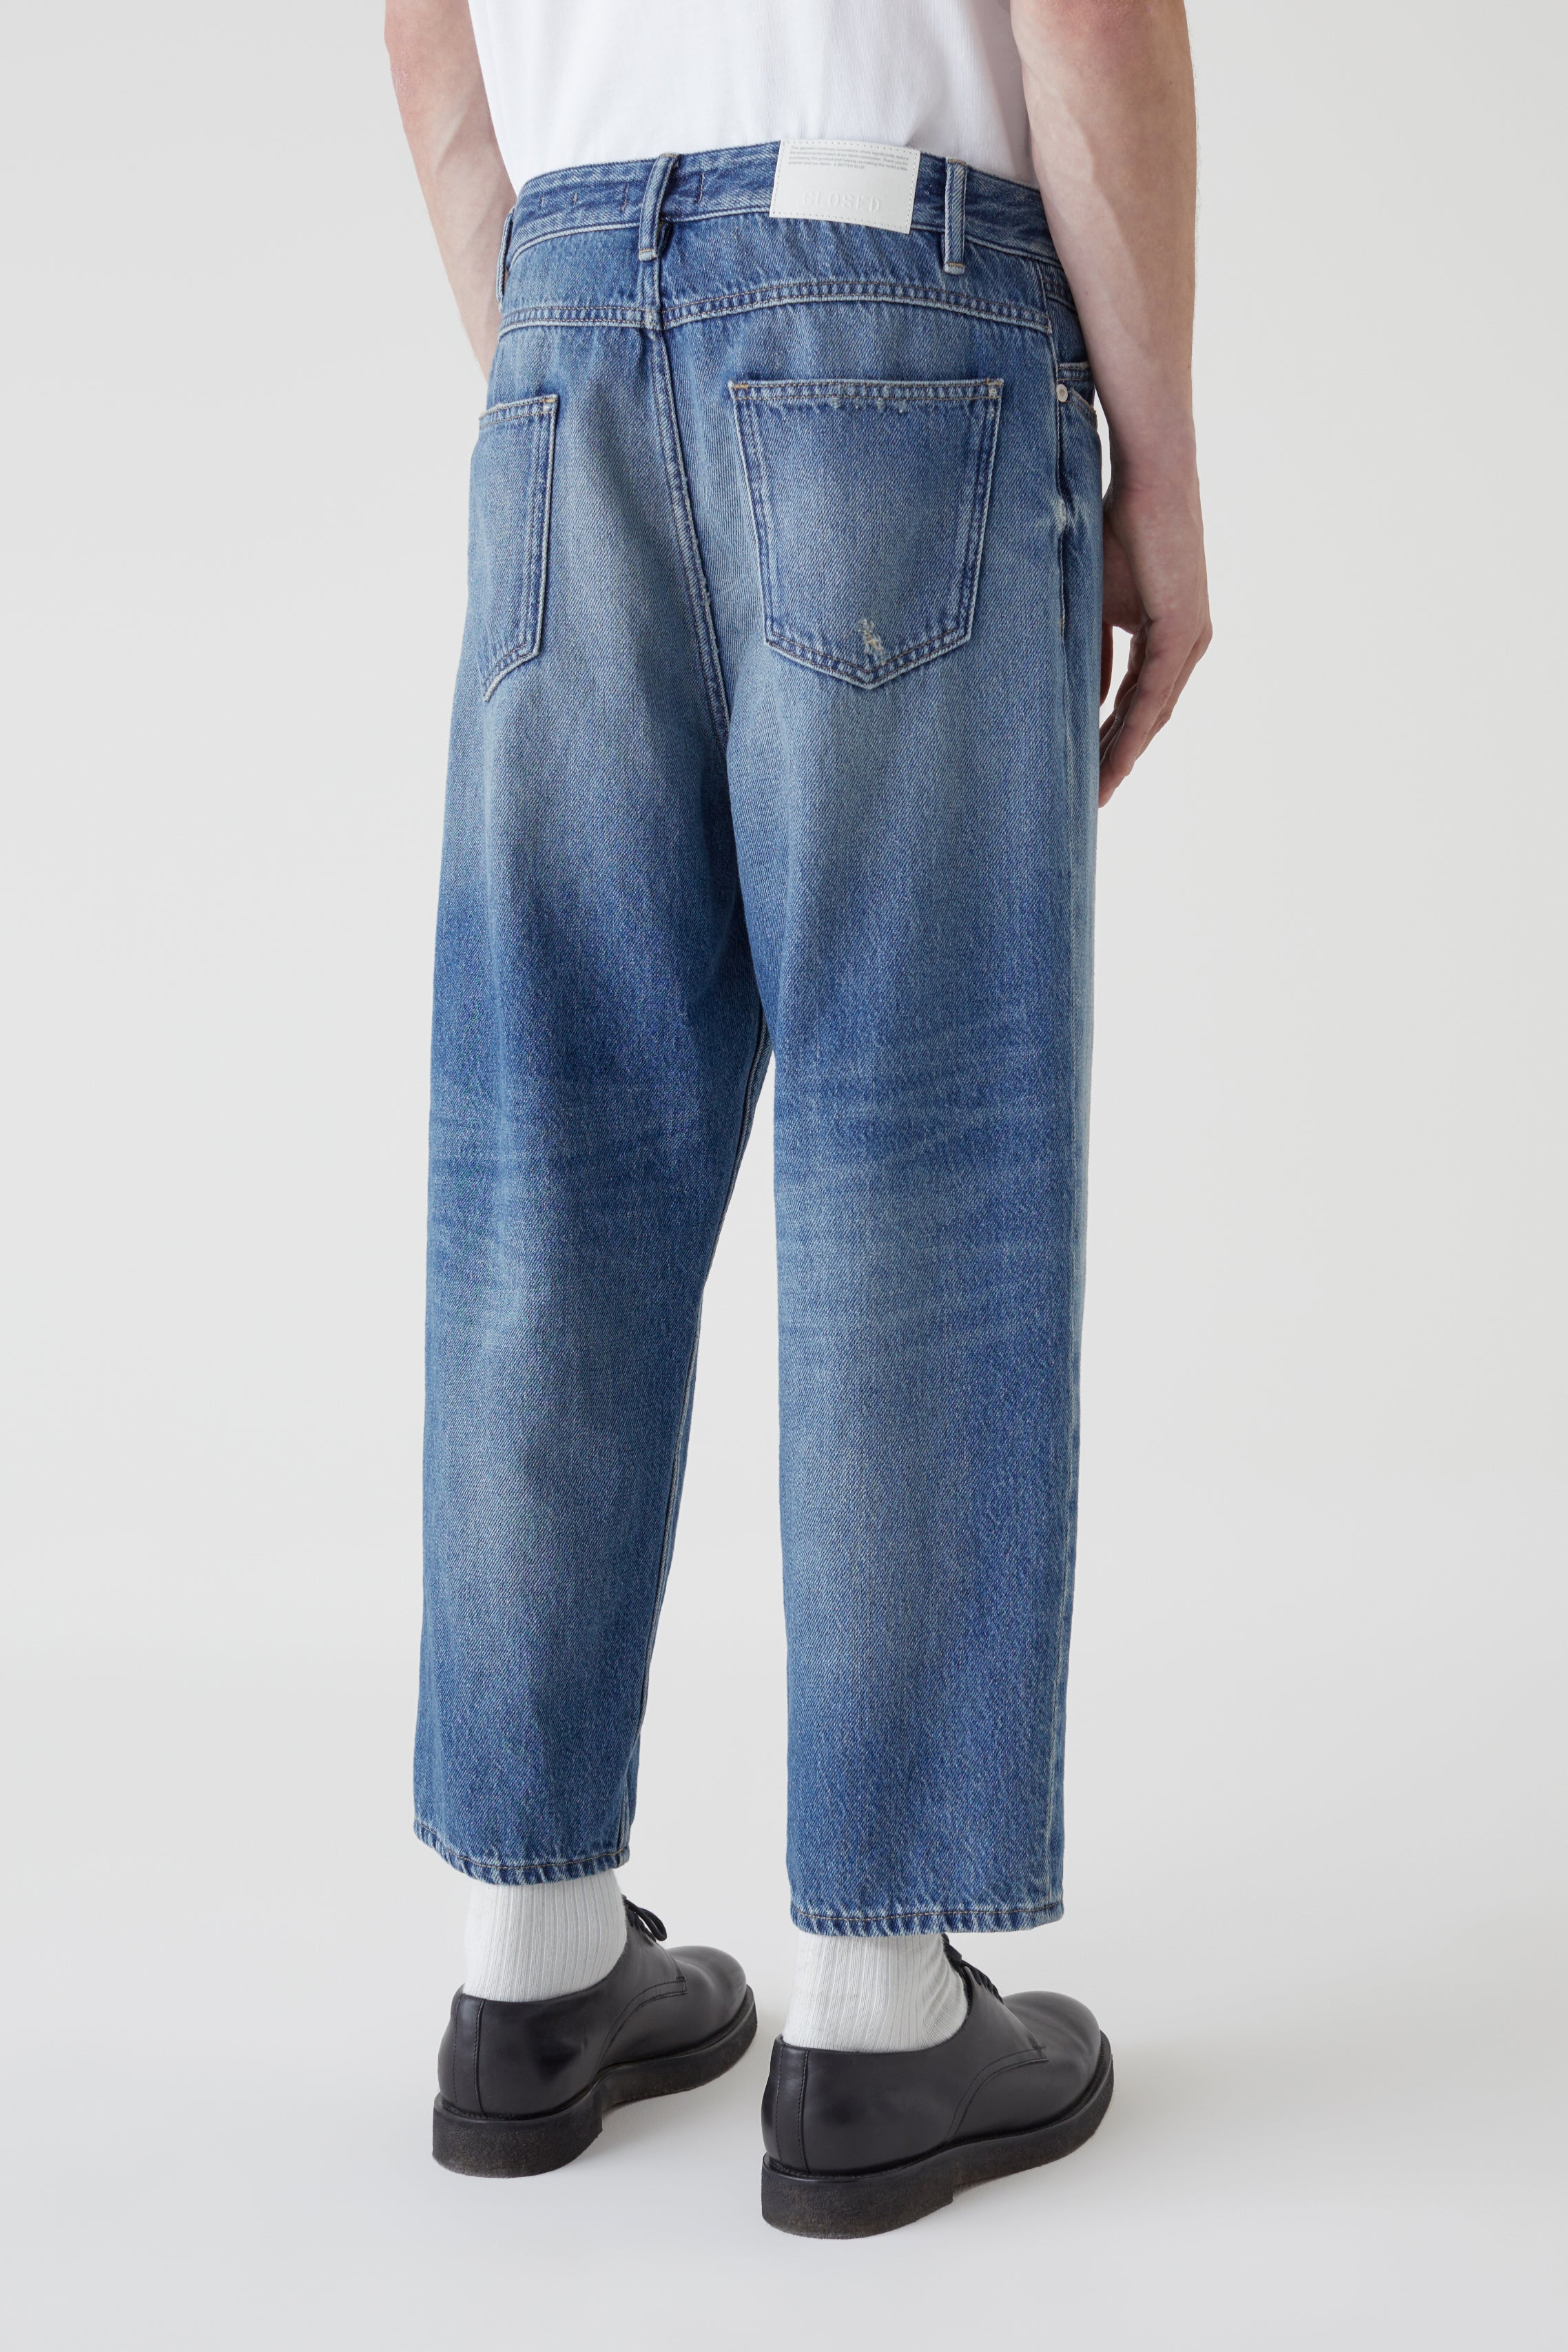 STYLE NAME SPRINGDALE RELAXED JEANS